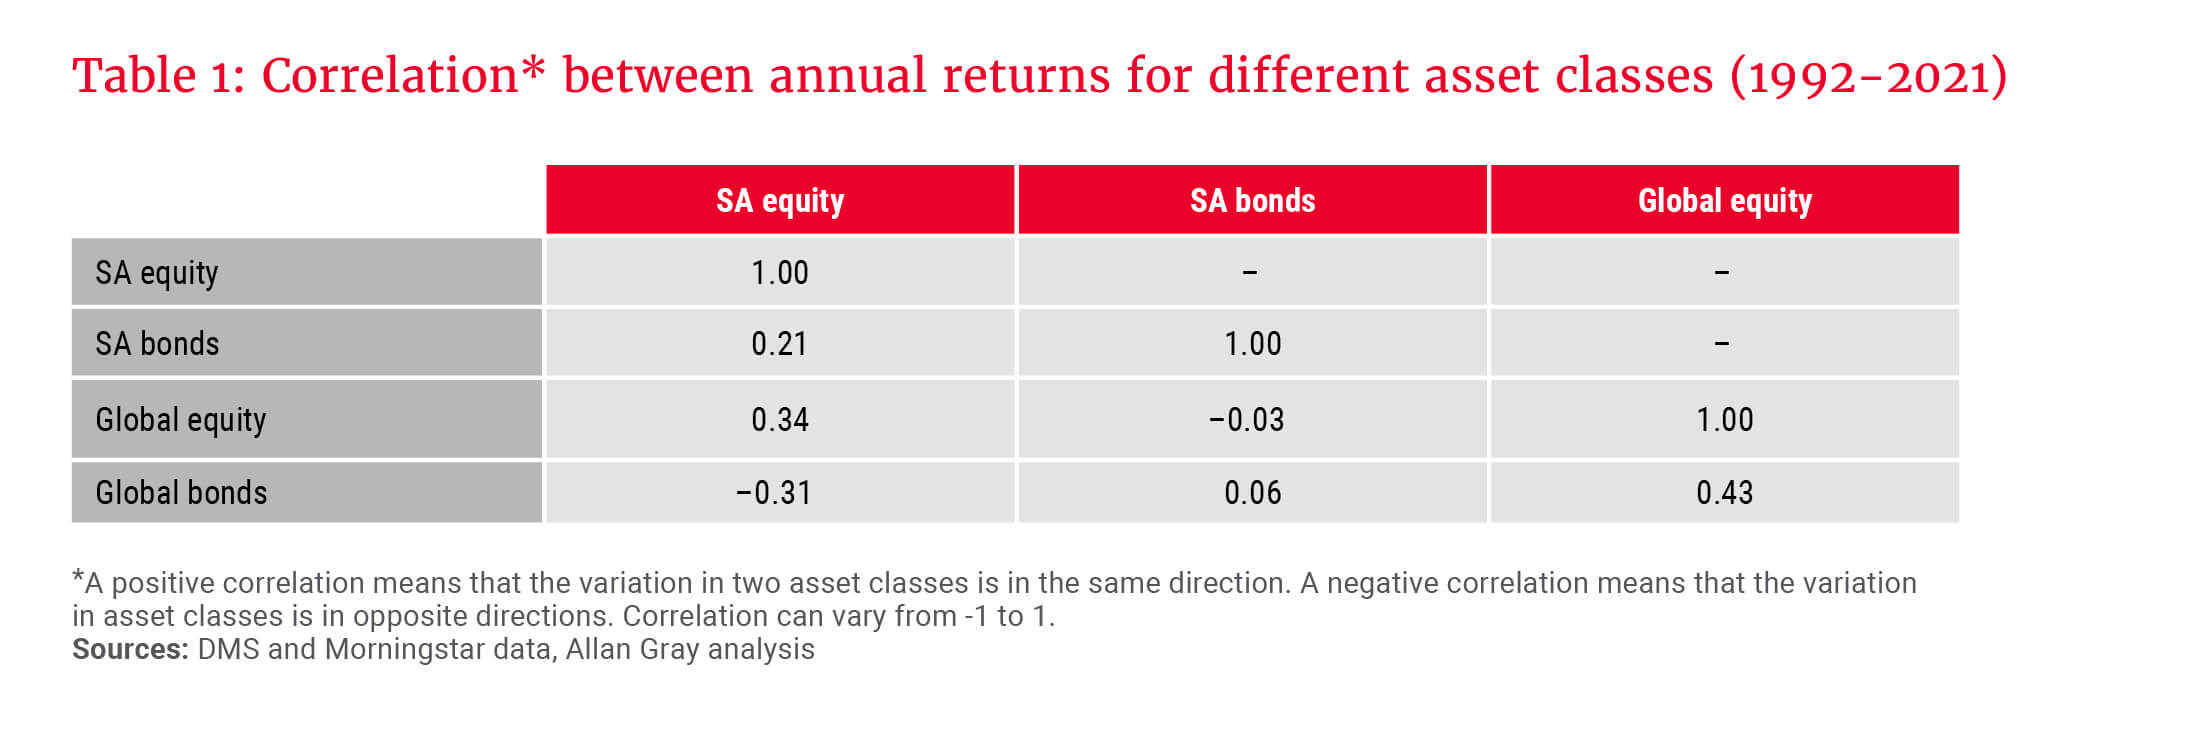 Table 1_Correlation between annual returns for different asset classes 1992-2021.jpg